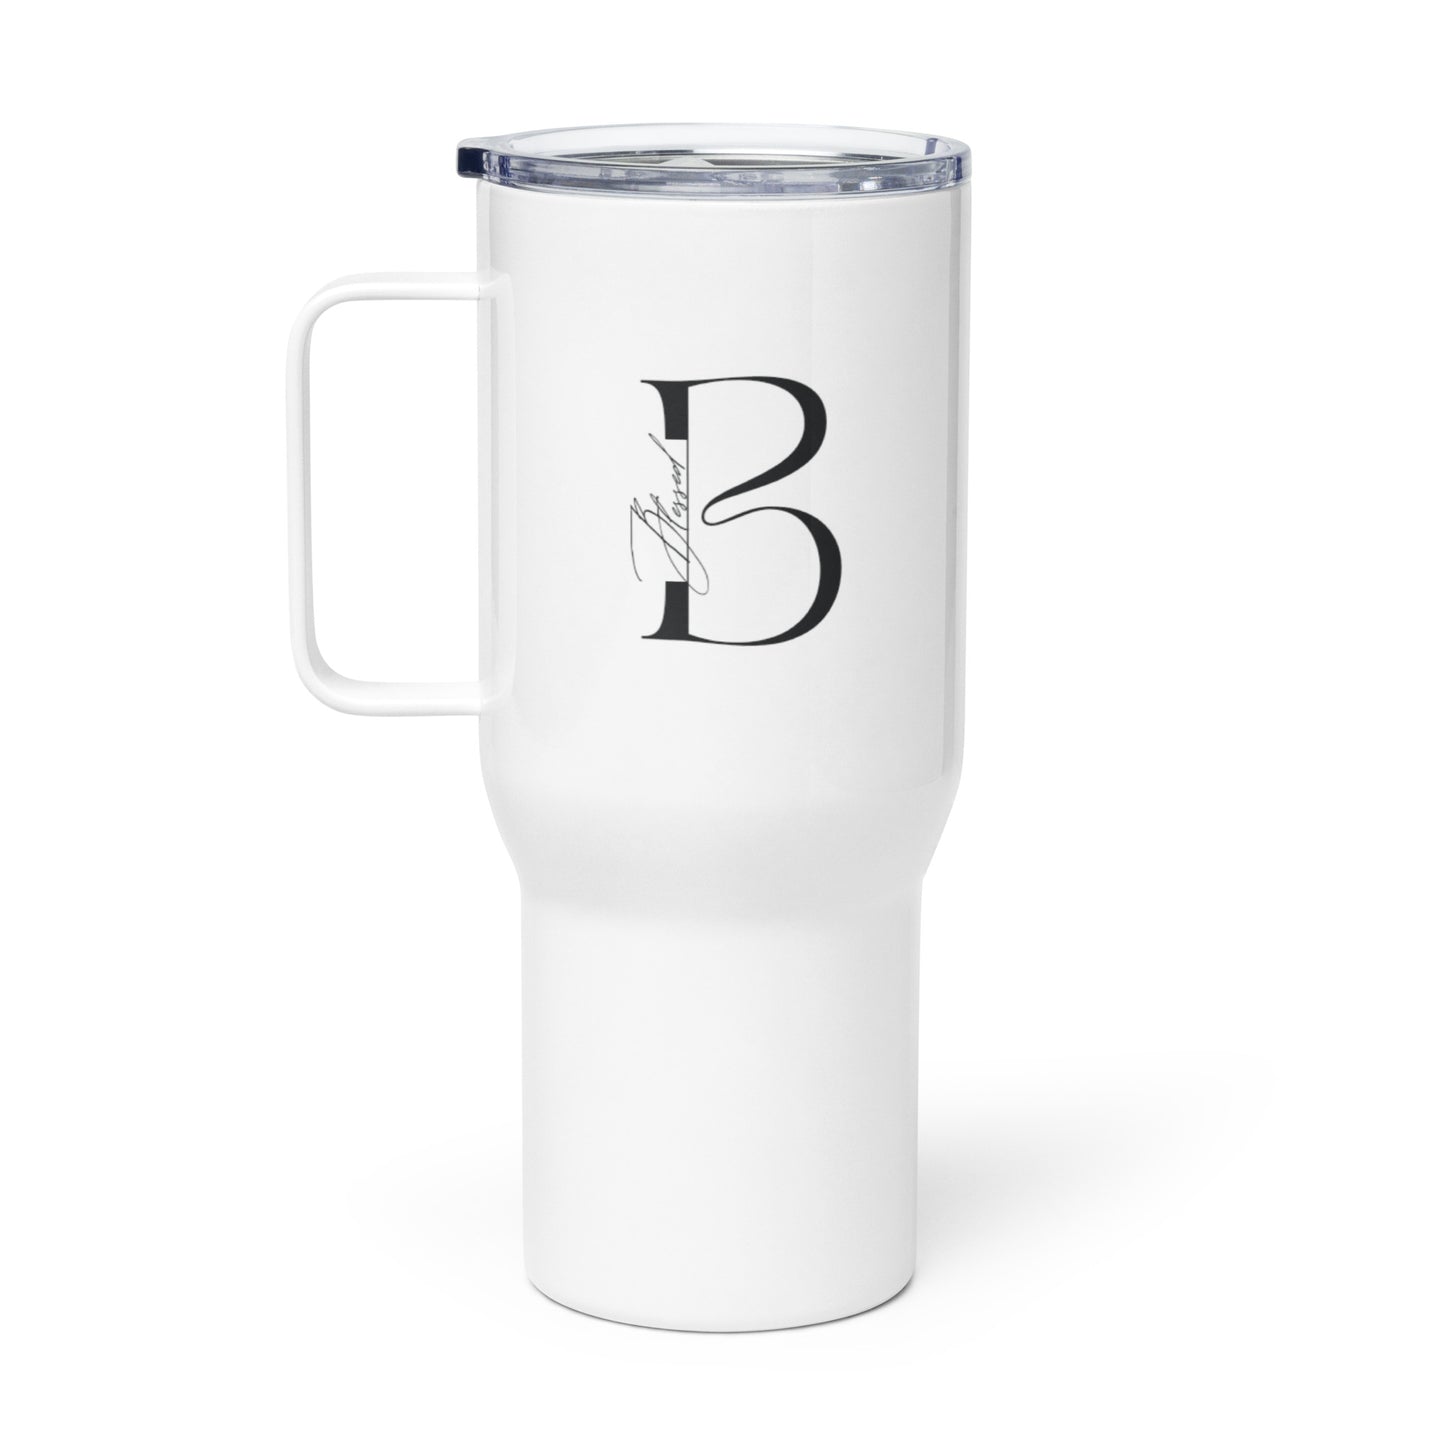 Blessed Travel mug with a handle